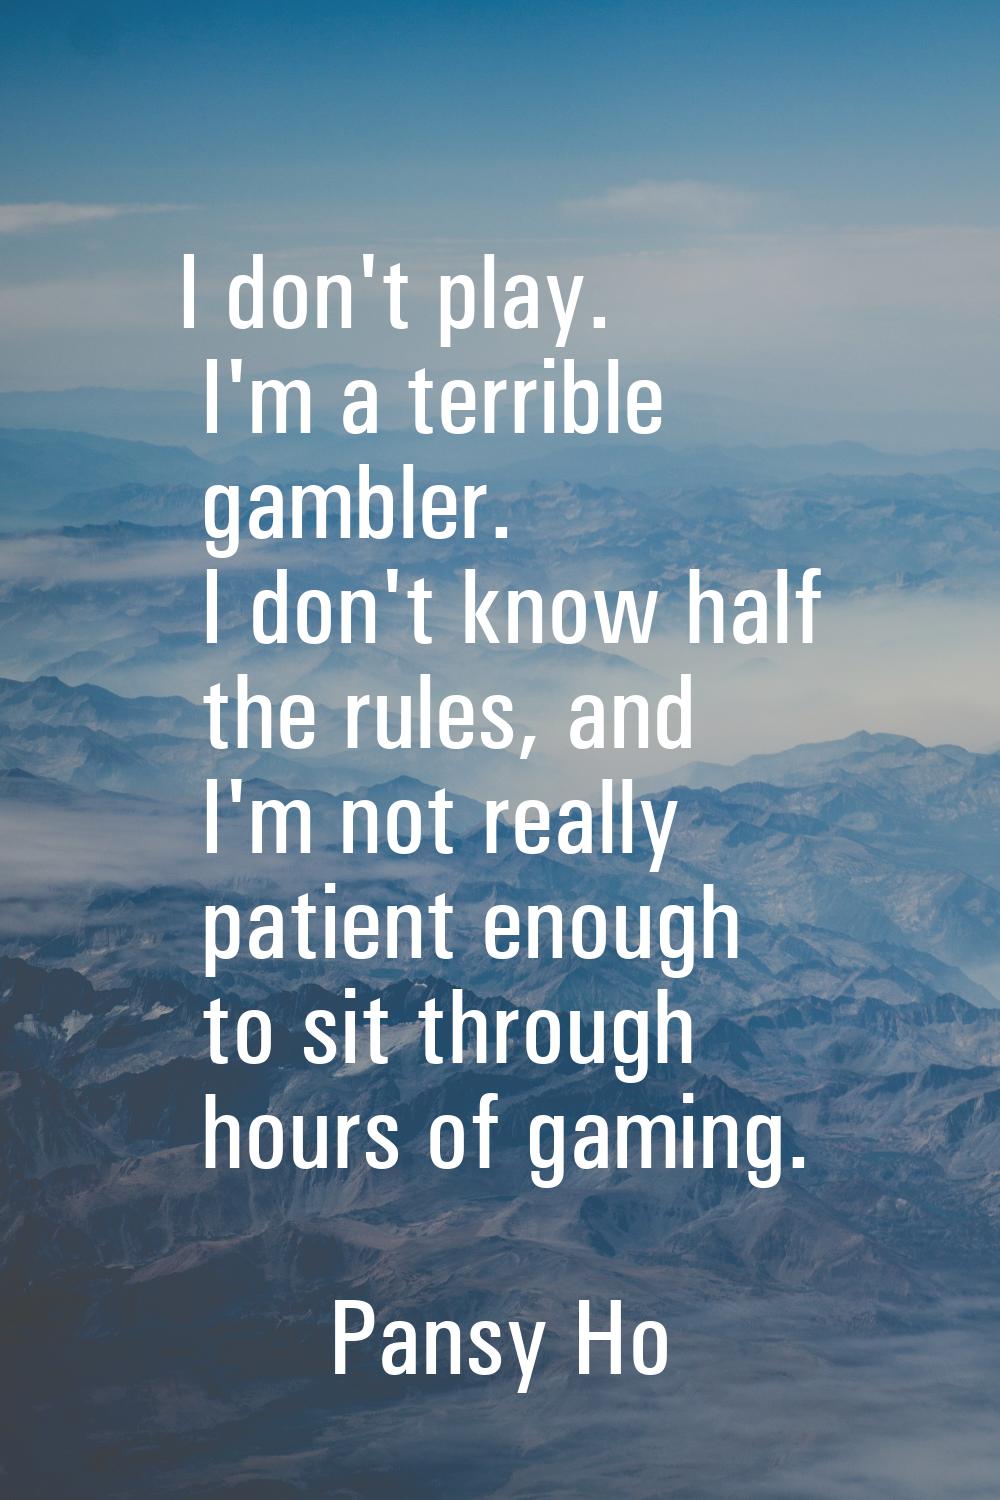 I don't play. I'm a terrible gambler. I don't know half the rules, and I'm not really patient enoug